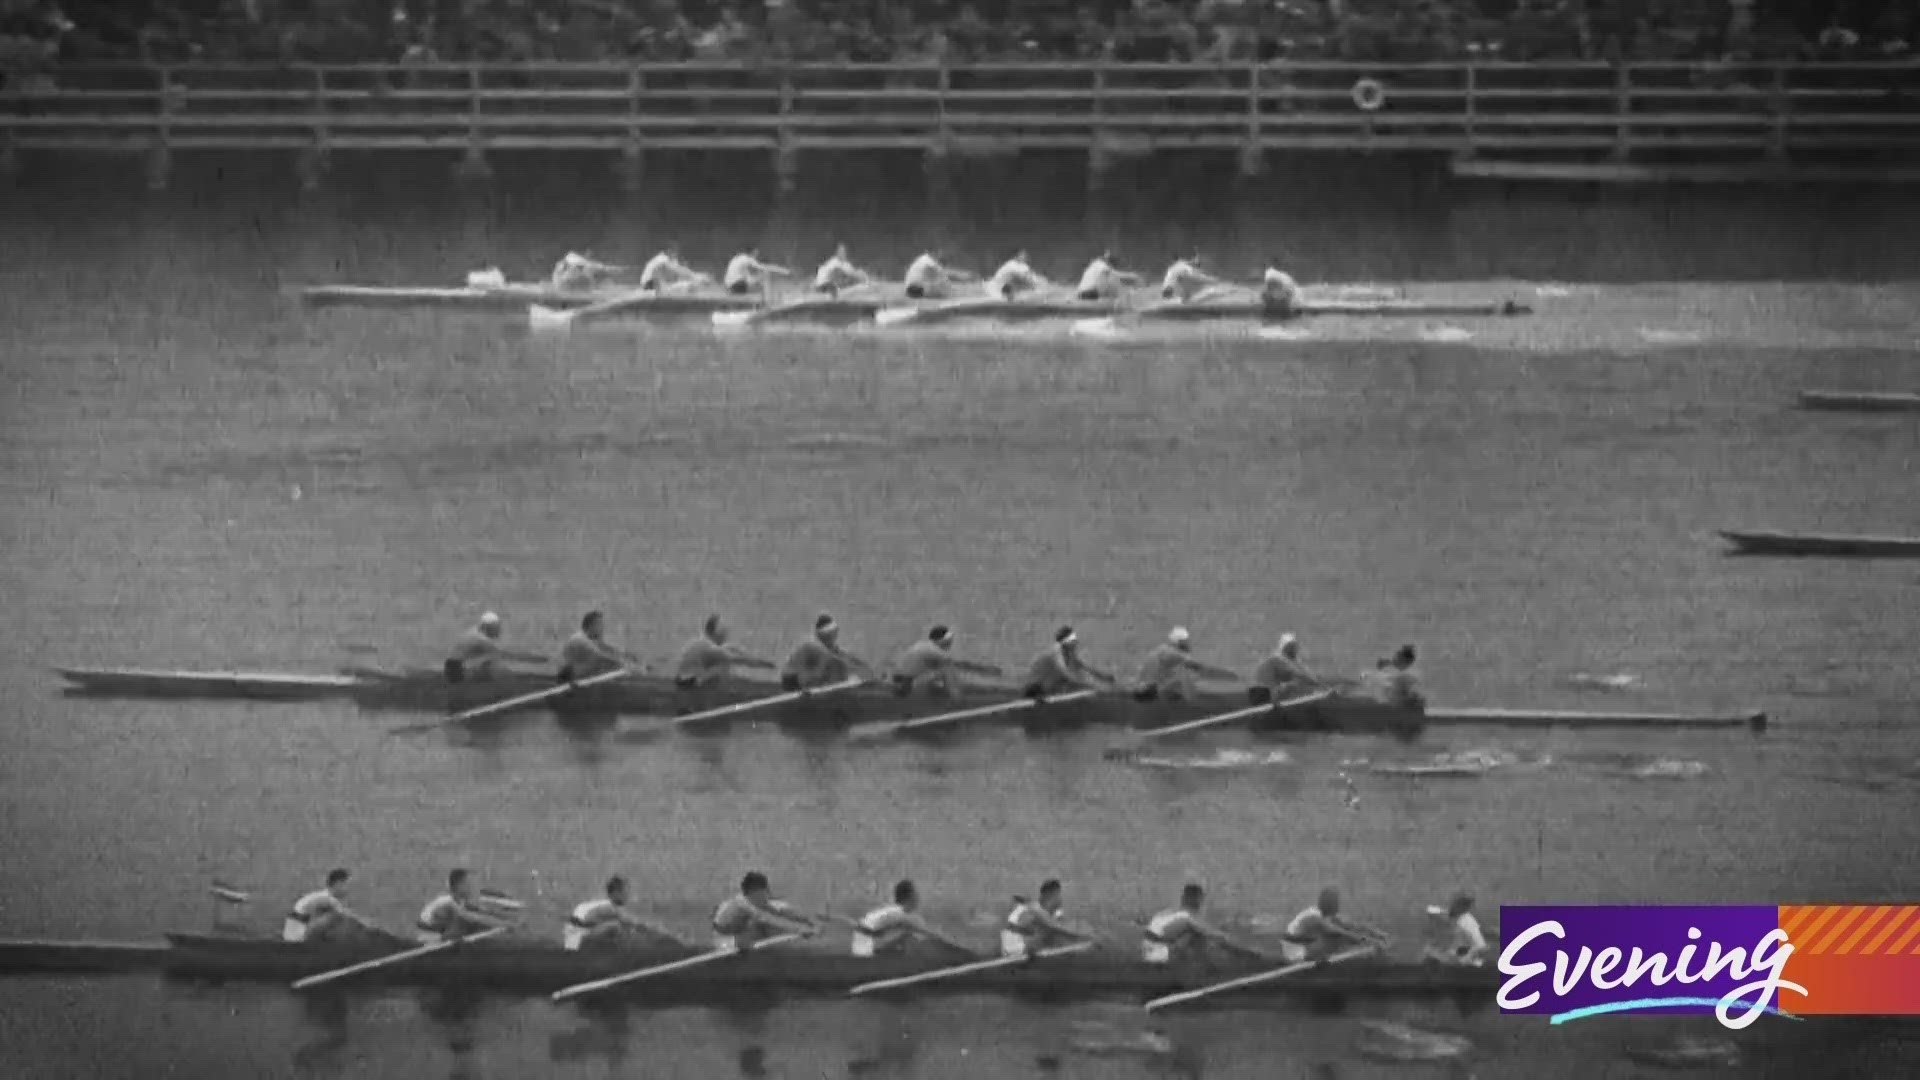 A Seattle author recalls rowing from the seat once occupied by an Olympic hero. #k5evening